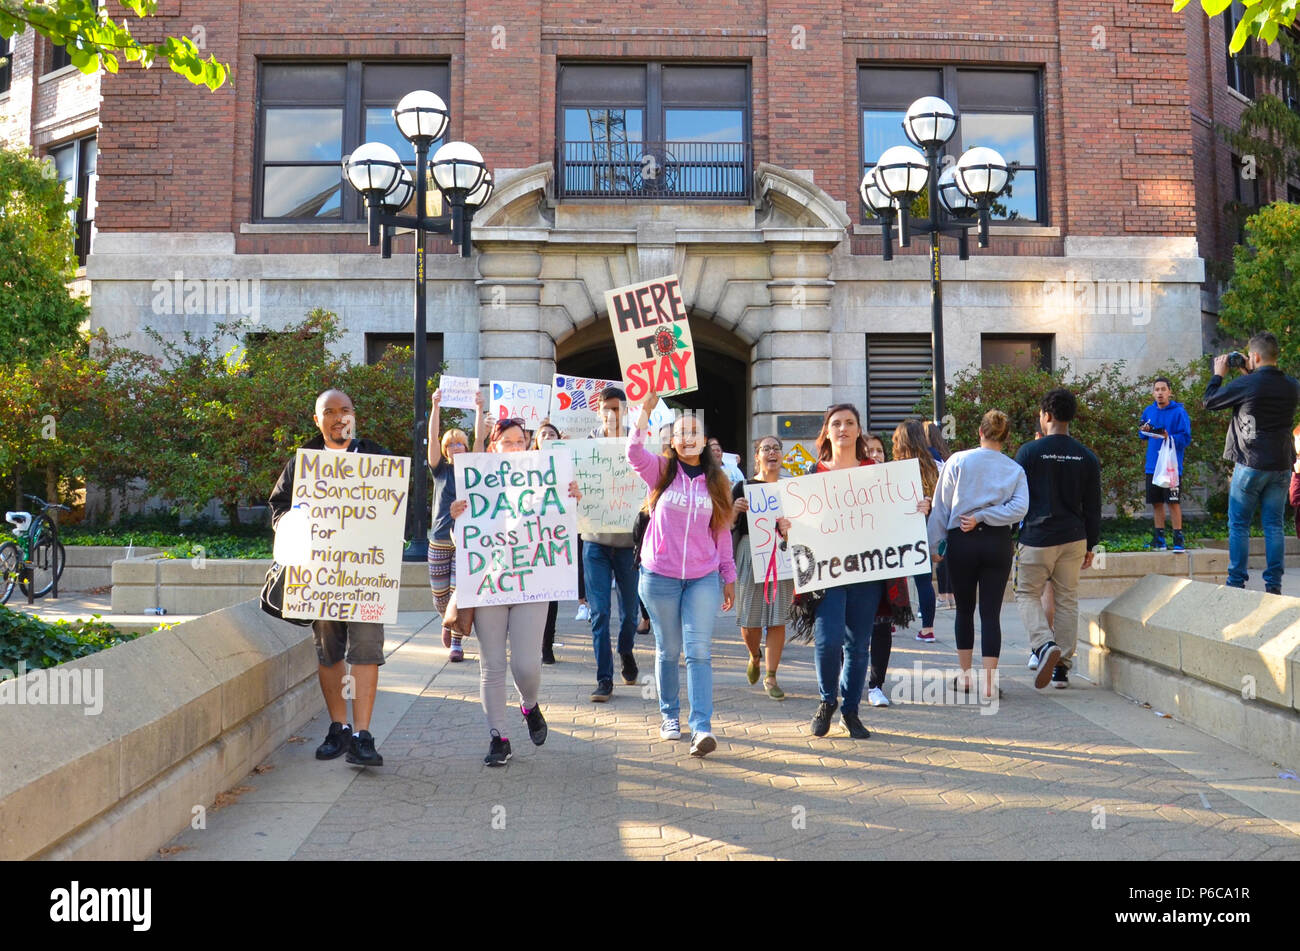 ANN ARBOR, MI / USA - SEPTEMBER 8, 2017: Protesters show their support for dreamers at a pro - DACA rally at the University of Michigan. Stock Photo